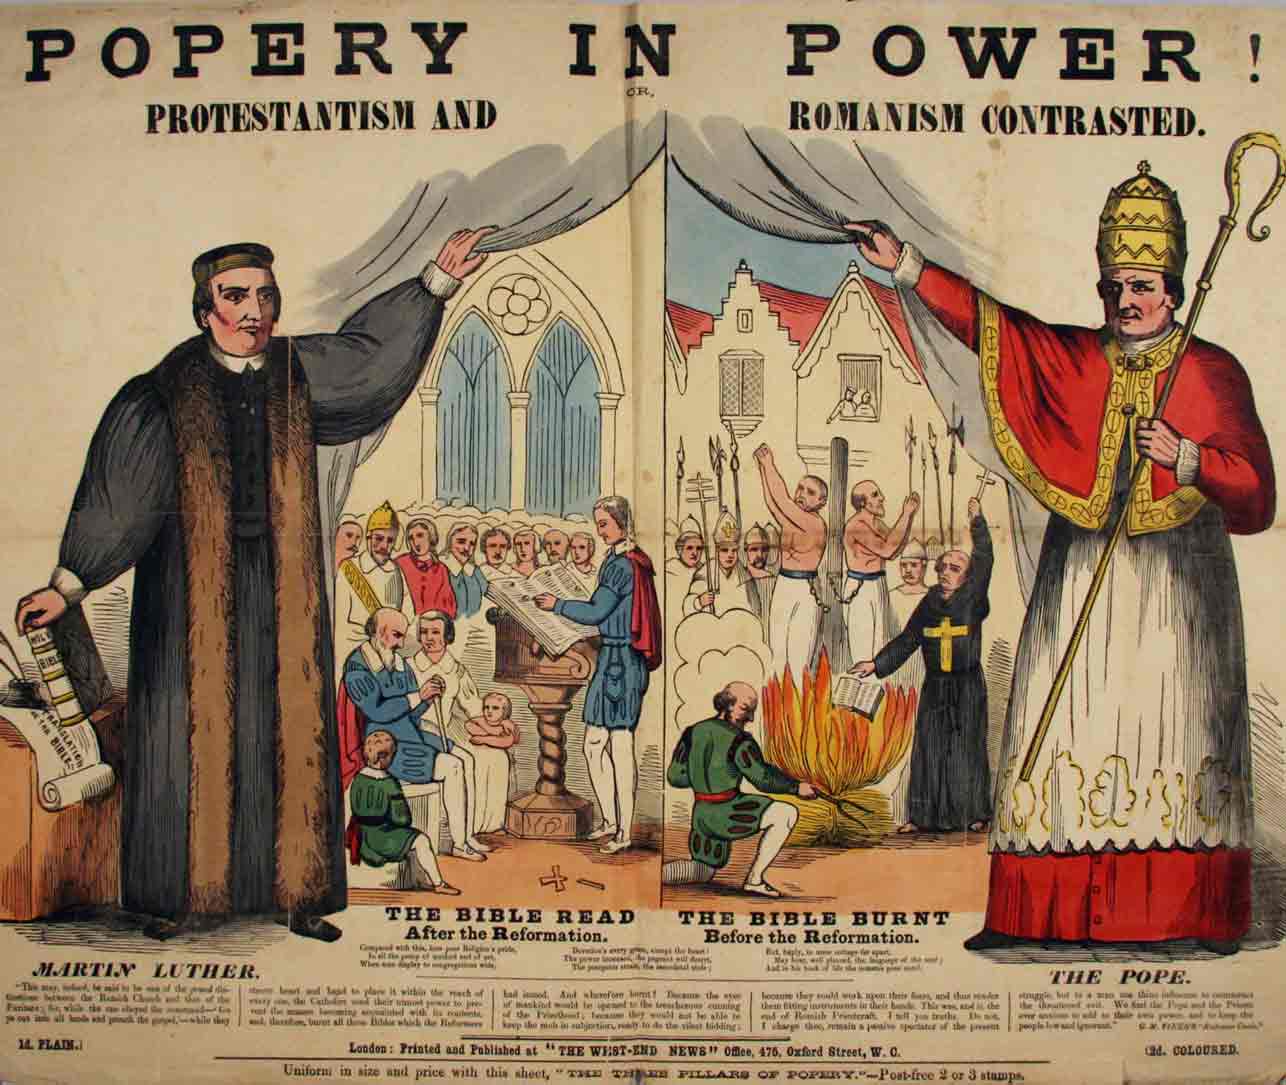  - Popery in Power. Protestantism and romanism contrasted. Martin Luther the bible read after the Reformation / The Pope. The bible burnt before the Reformation. Popular print.